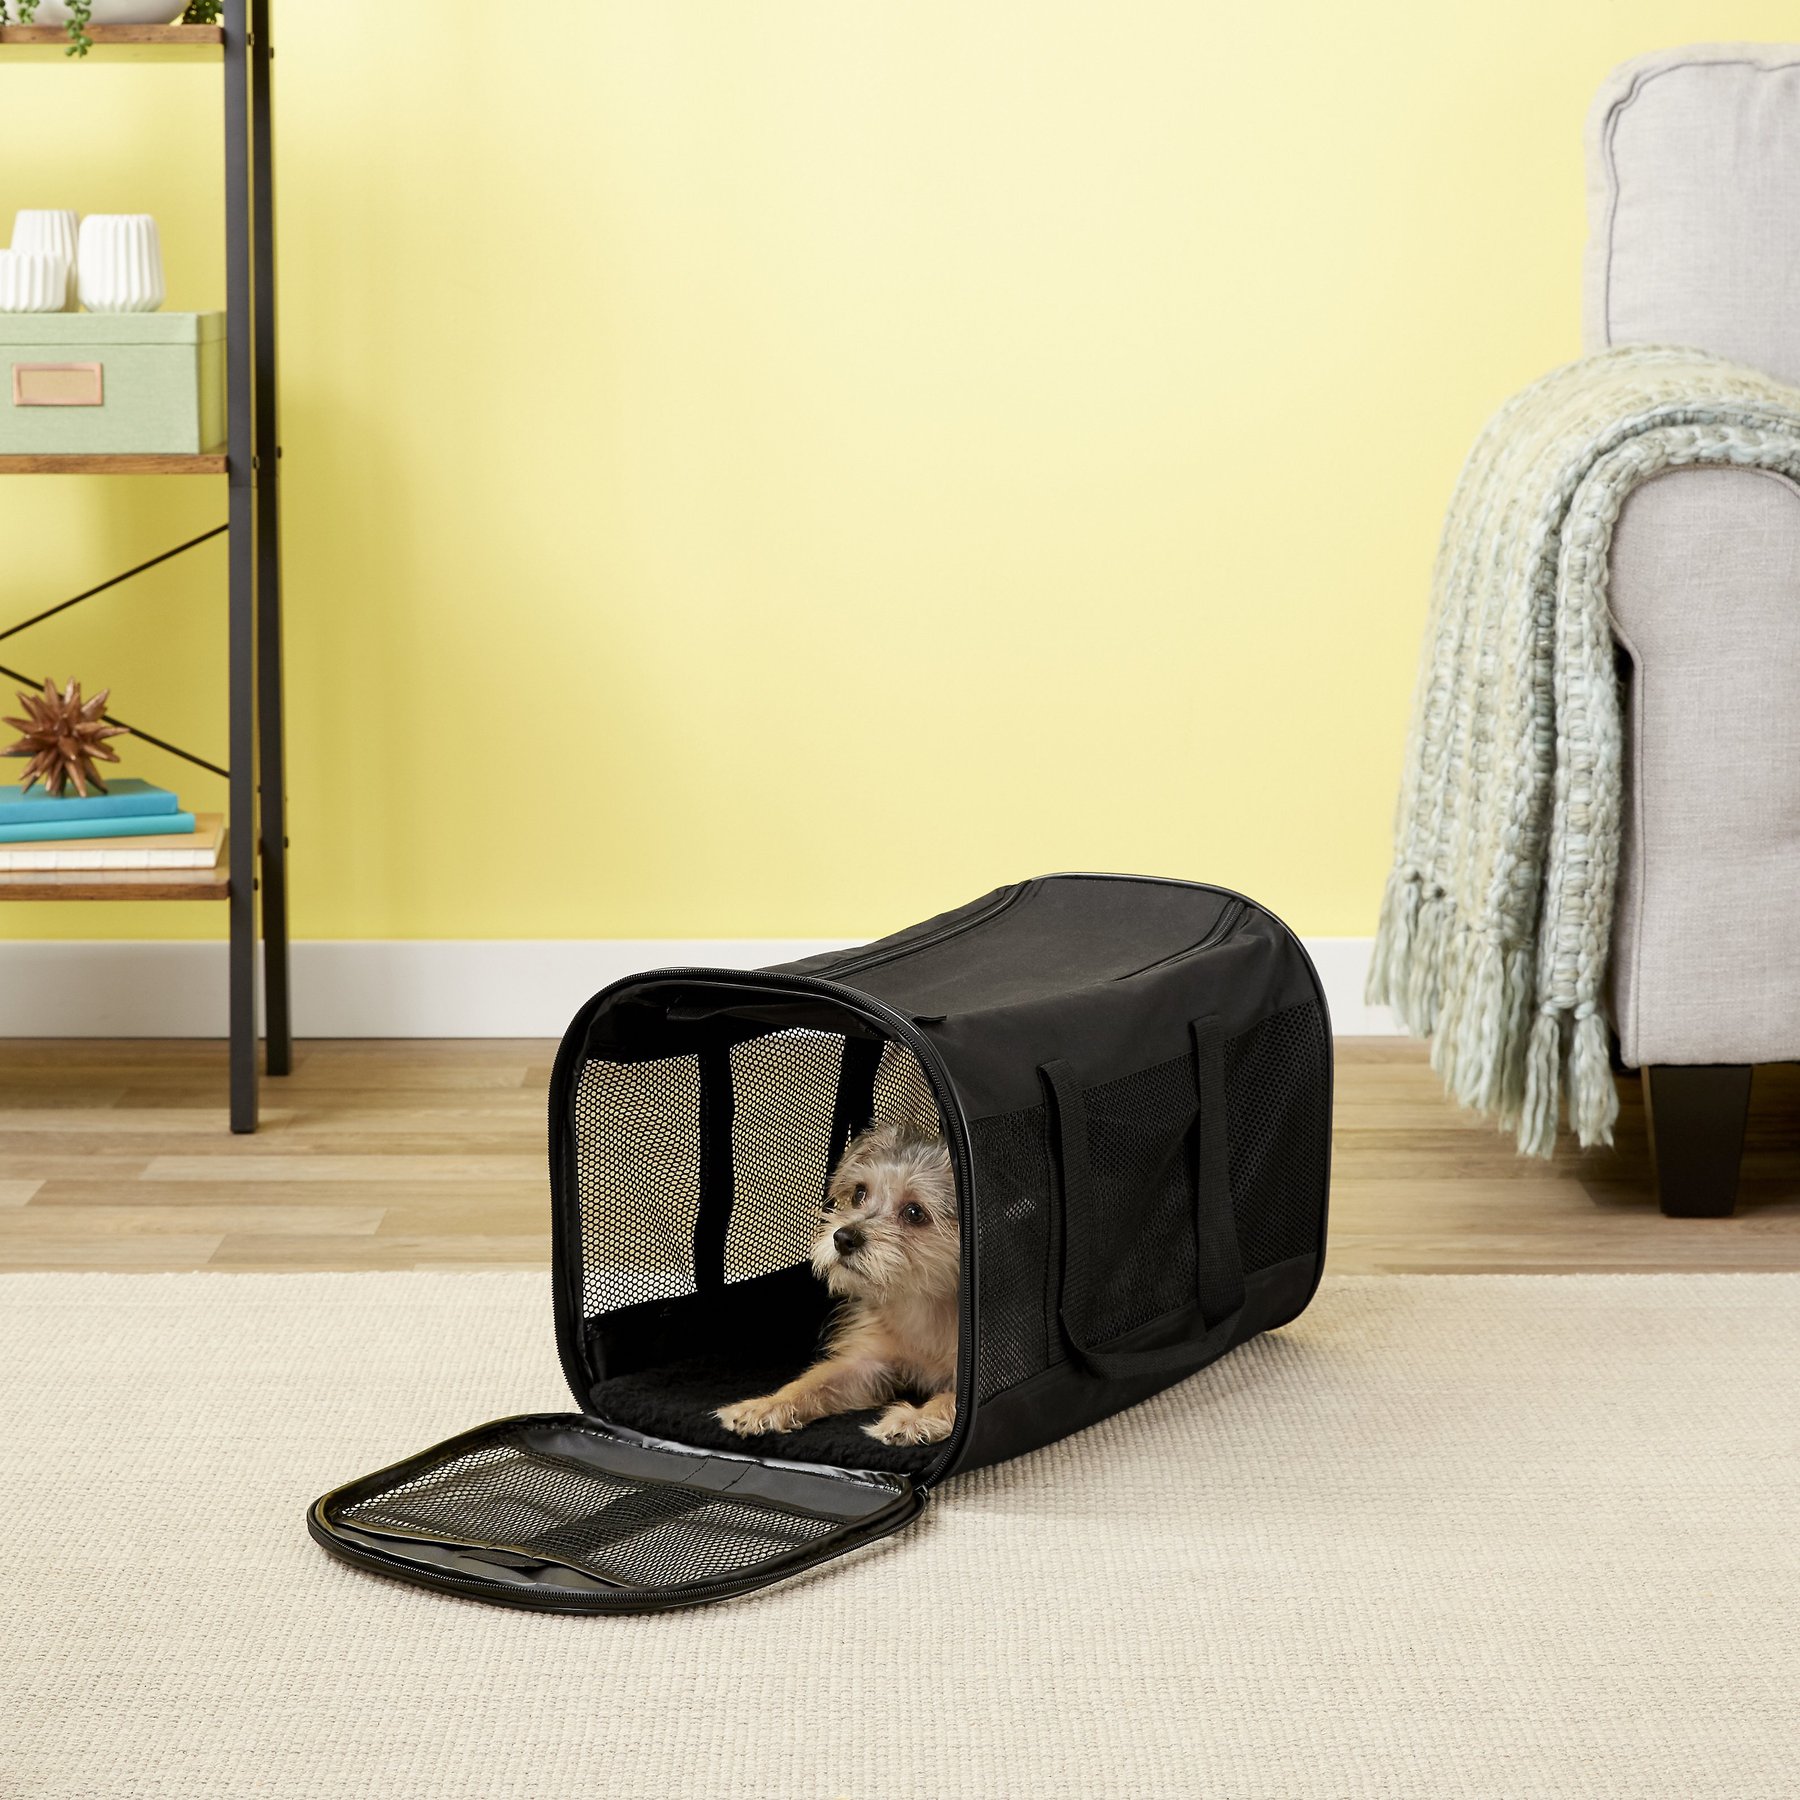 FRISCO Soft Double Sided Expandable Airline Compliant Dog & Cat Carrier,  Gray, Medium 